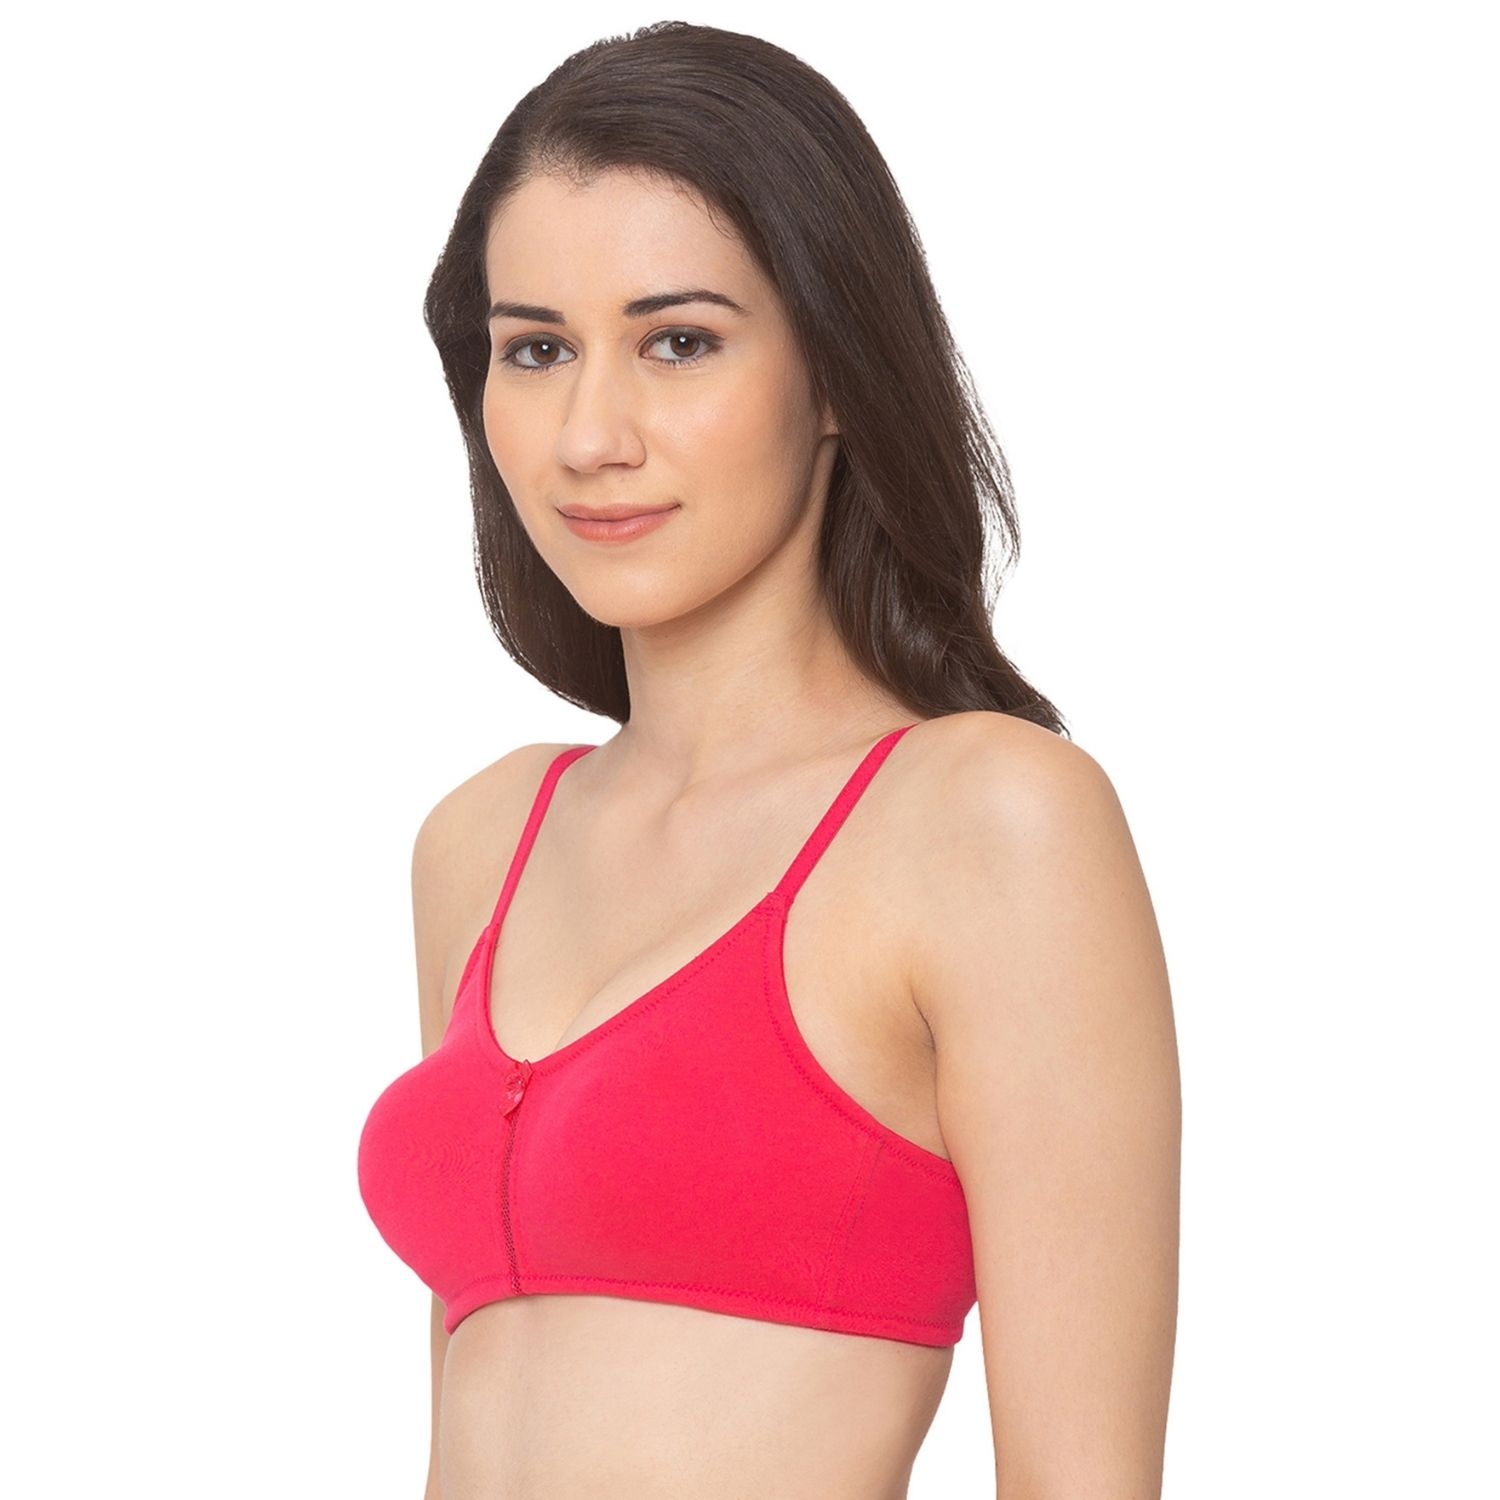 Candyskin Women's Pink Full Support Cotton Non-Padded Wirefree Full Coverage